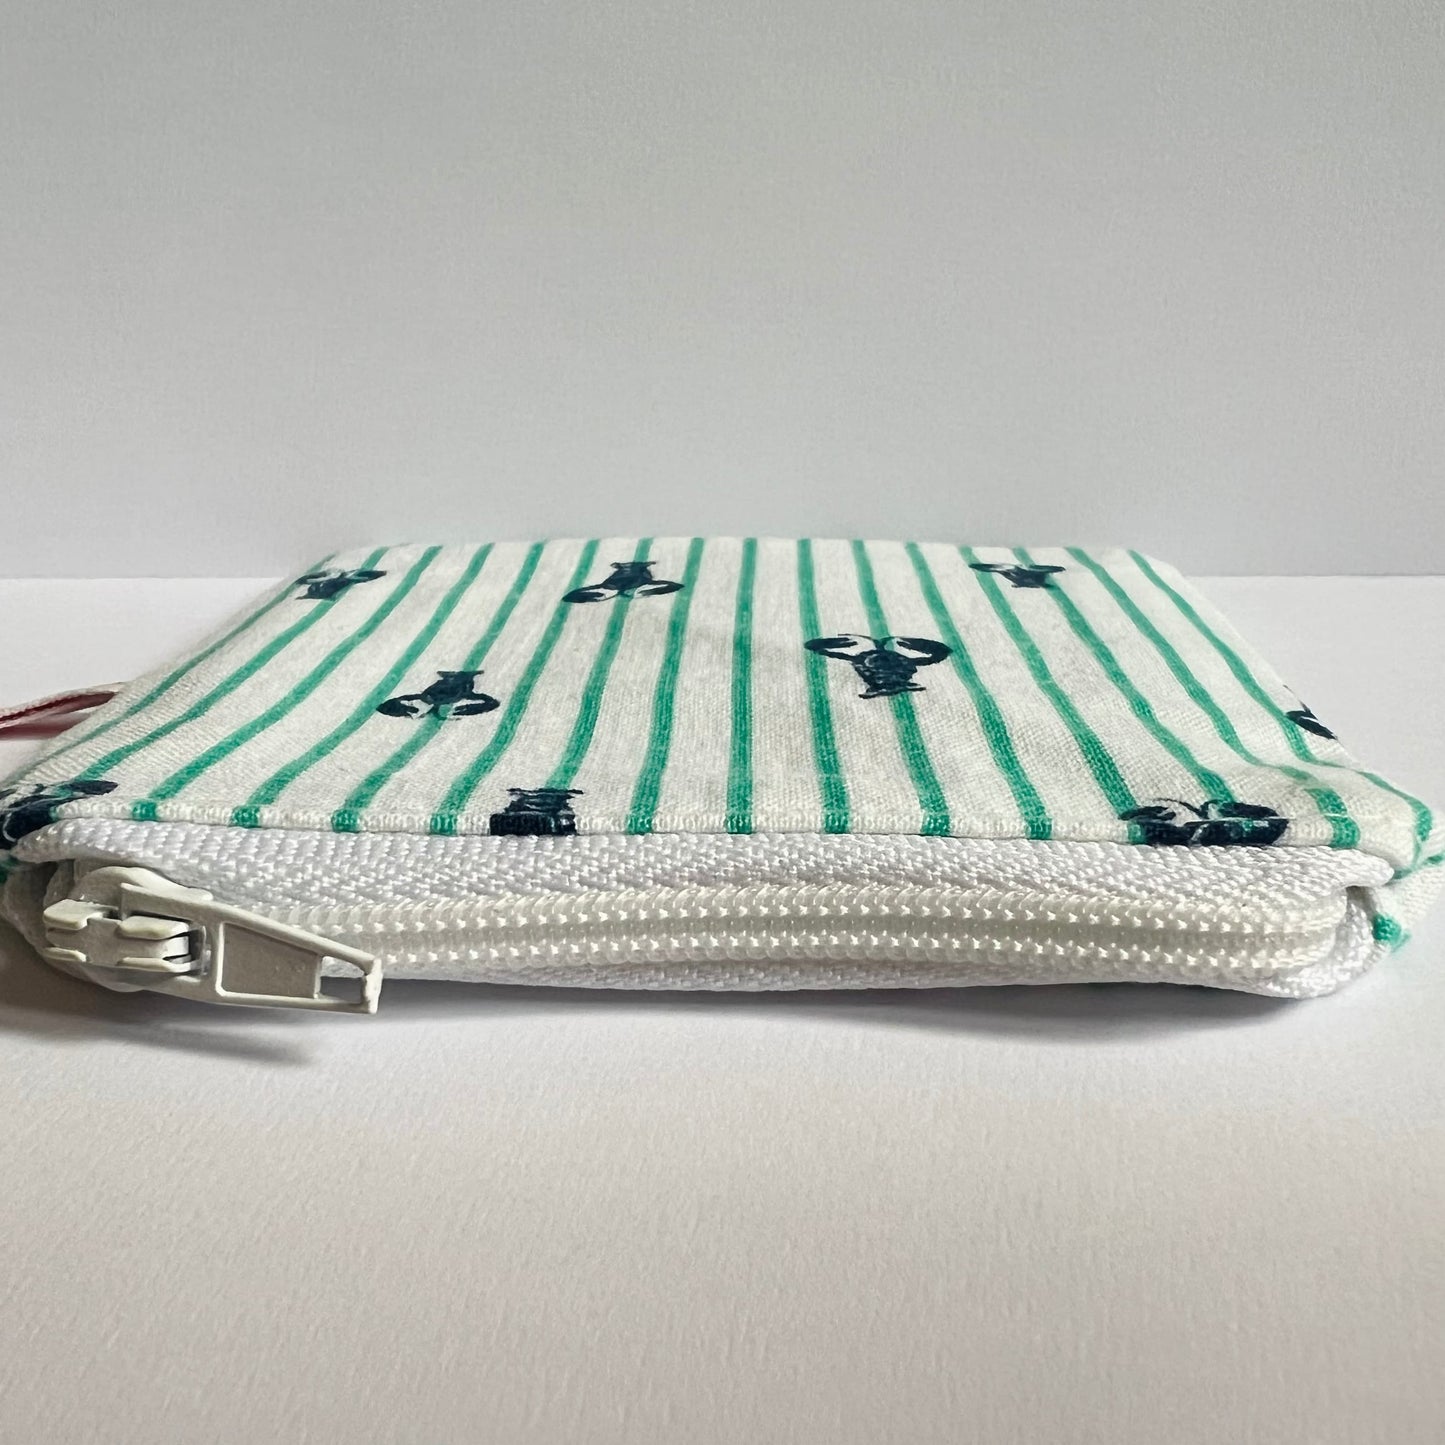 Striped Travel Purse for Stitch Markers - Seaside